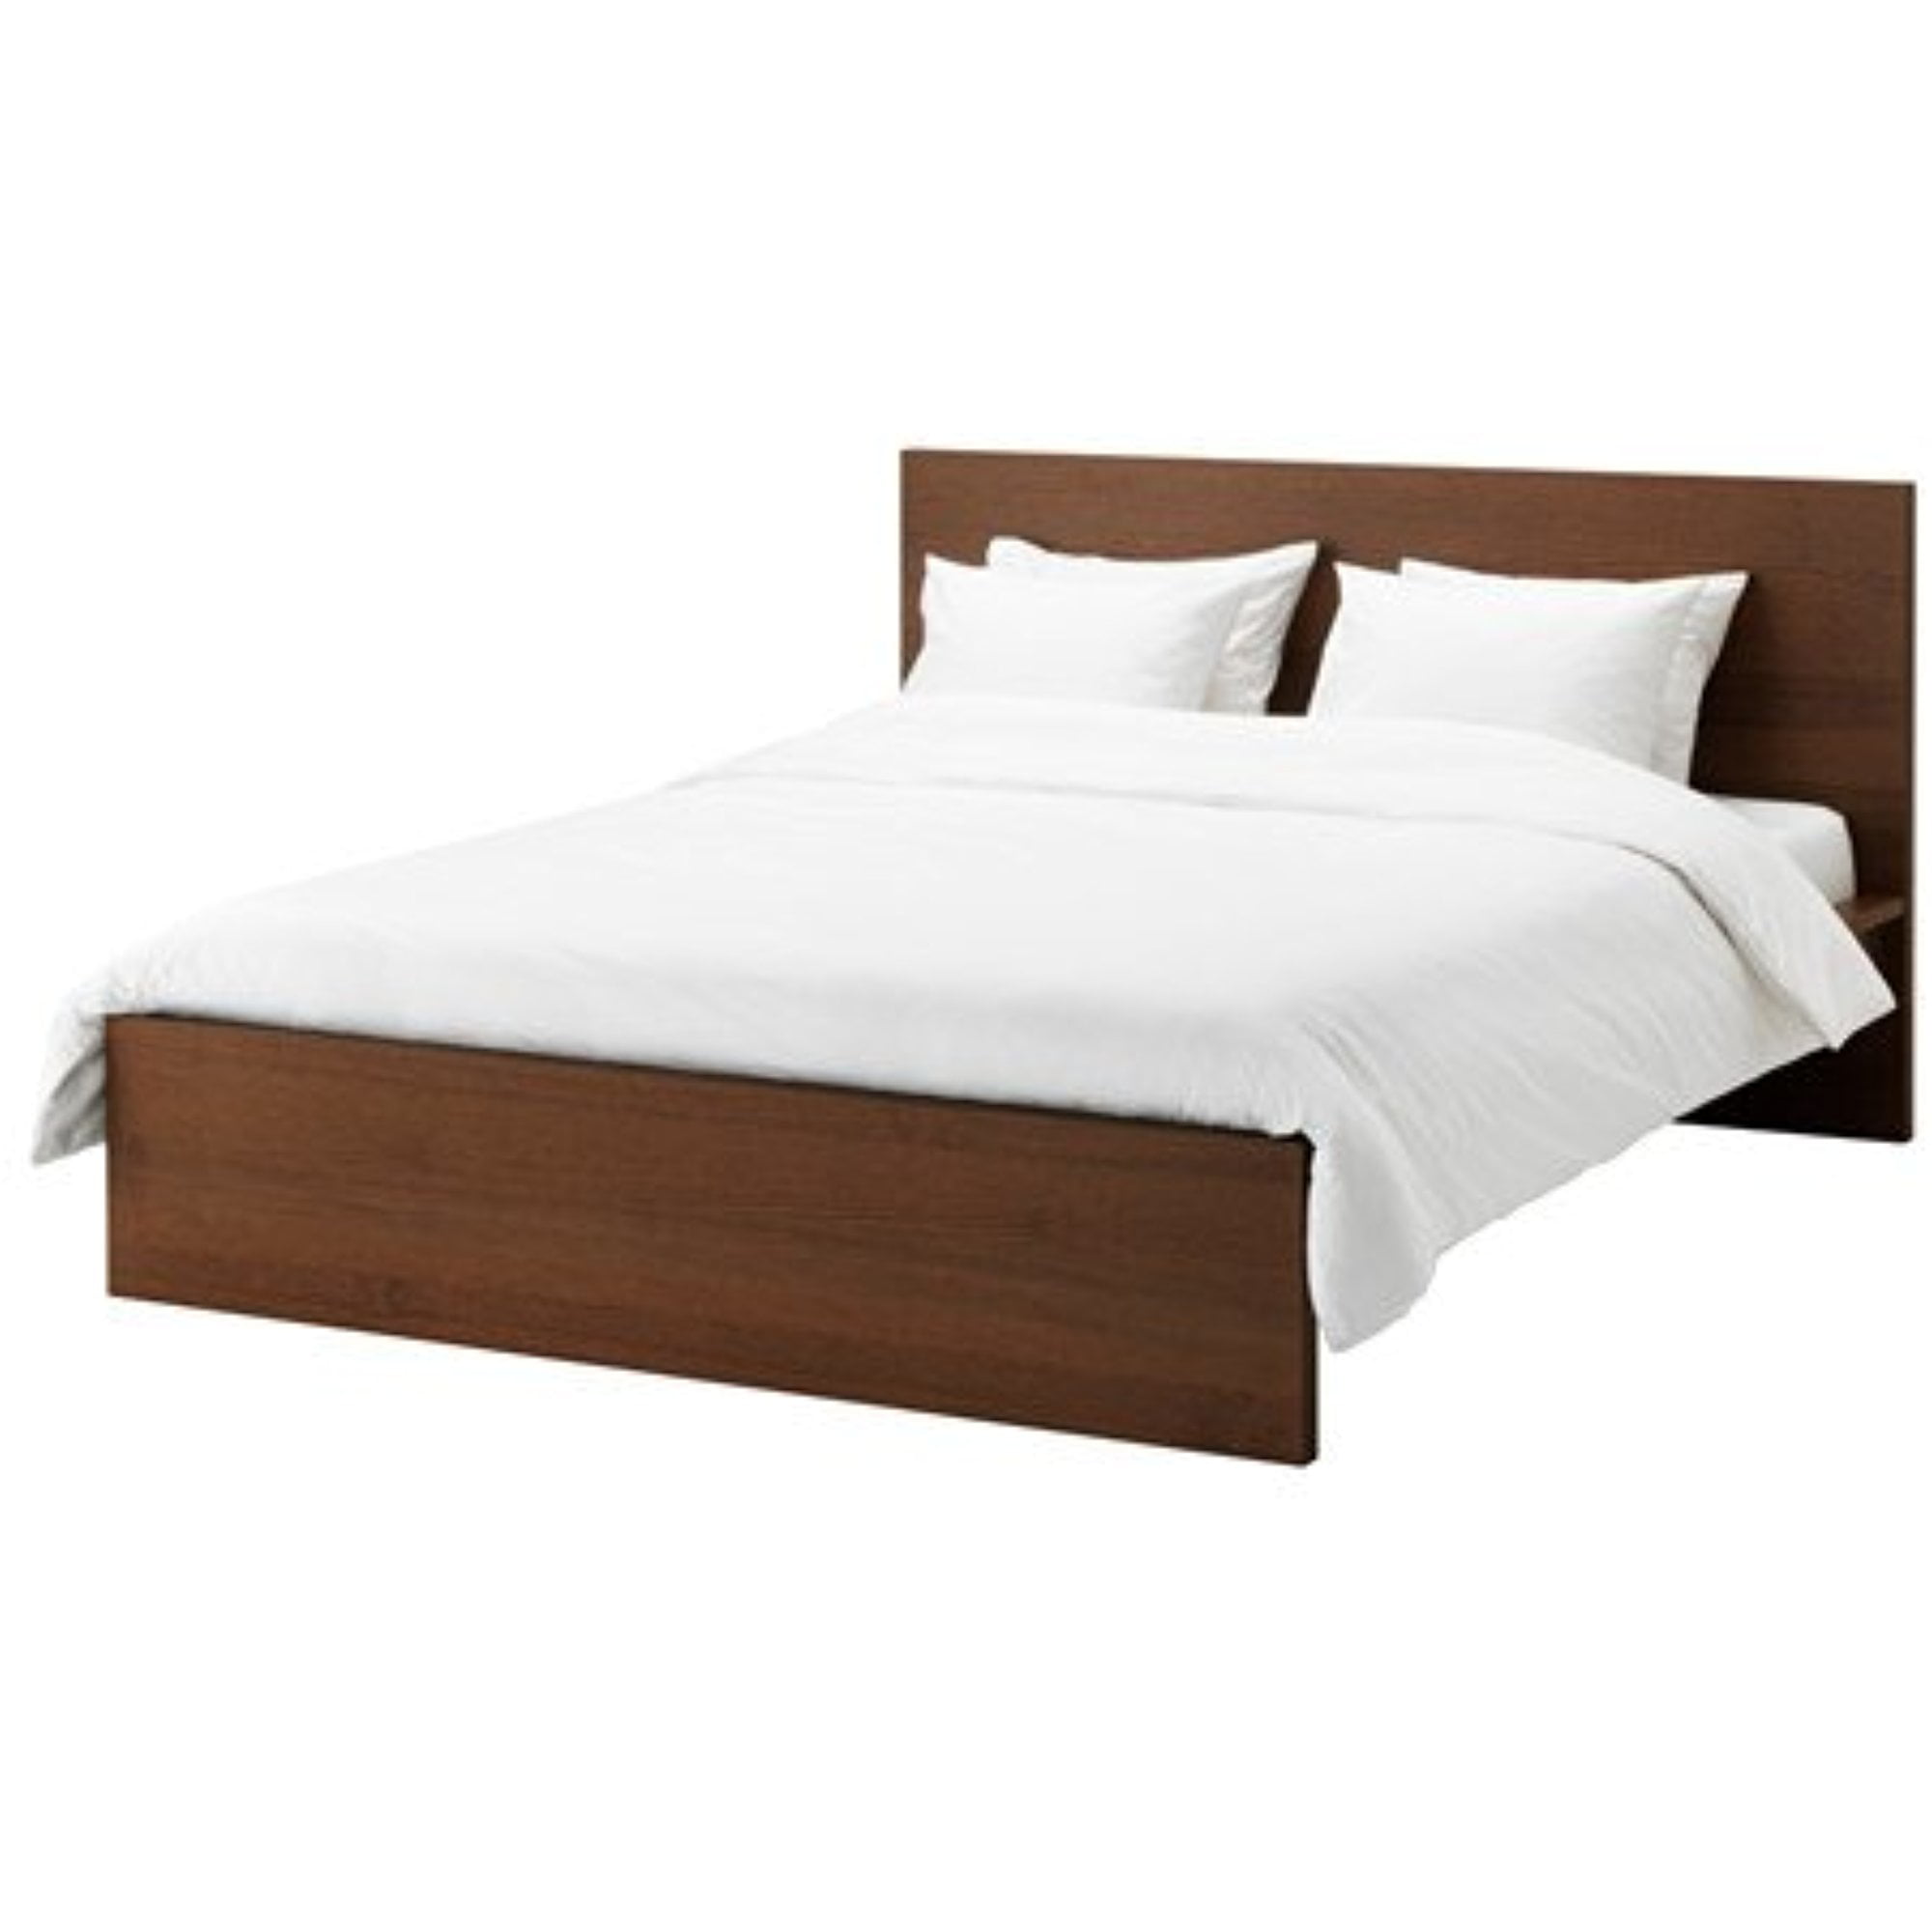 Ikea Queen Size Bed frame, high, brown stained ash veneer 18204.17232.